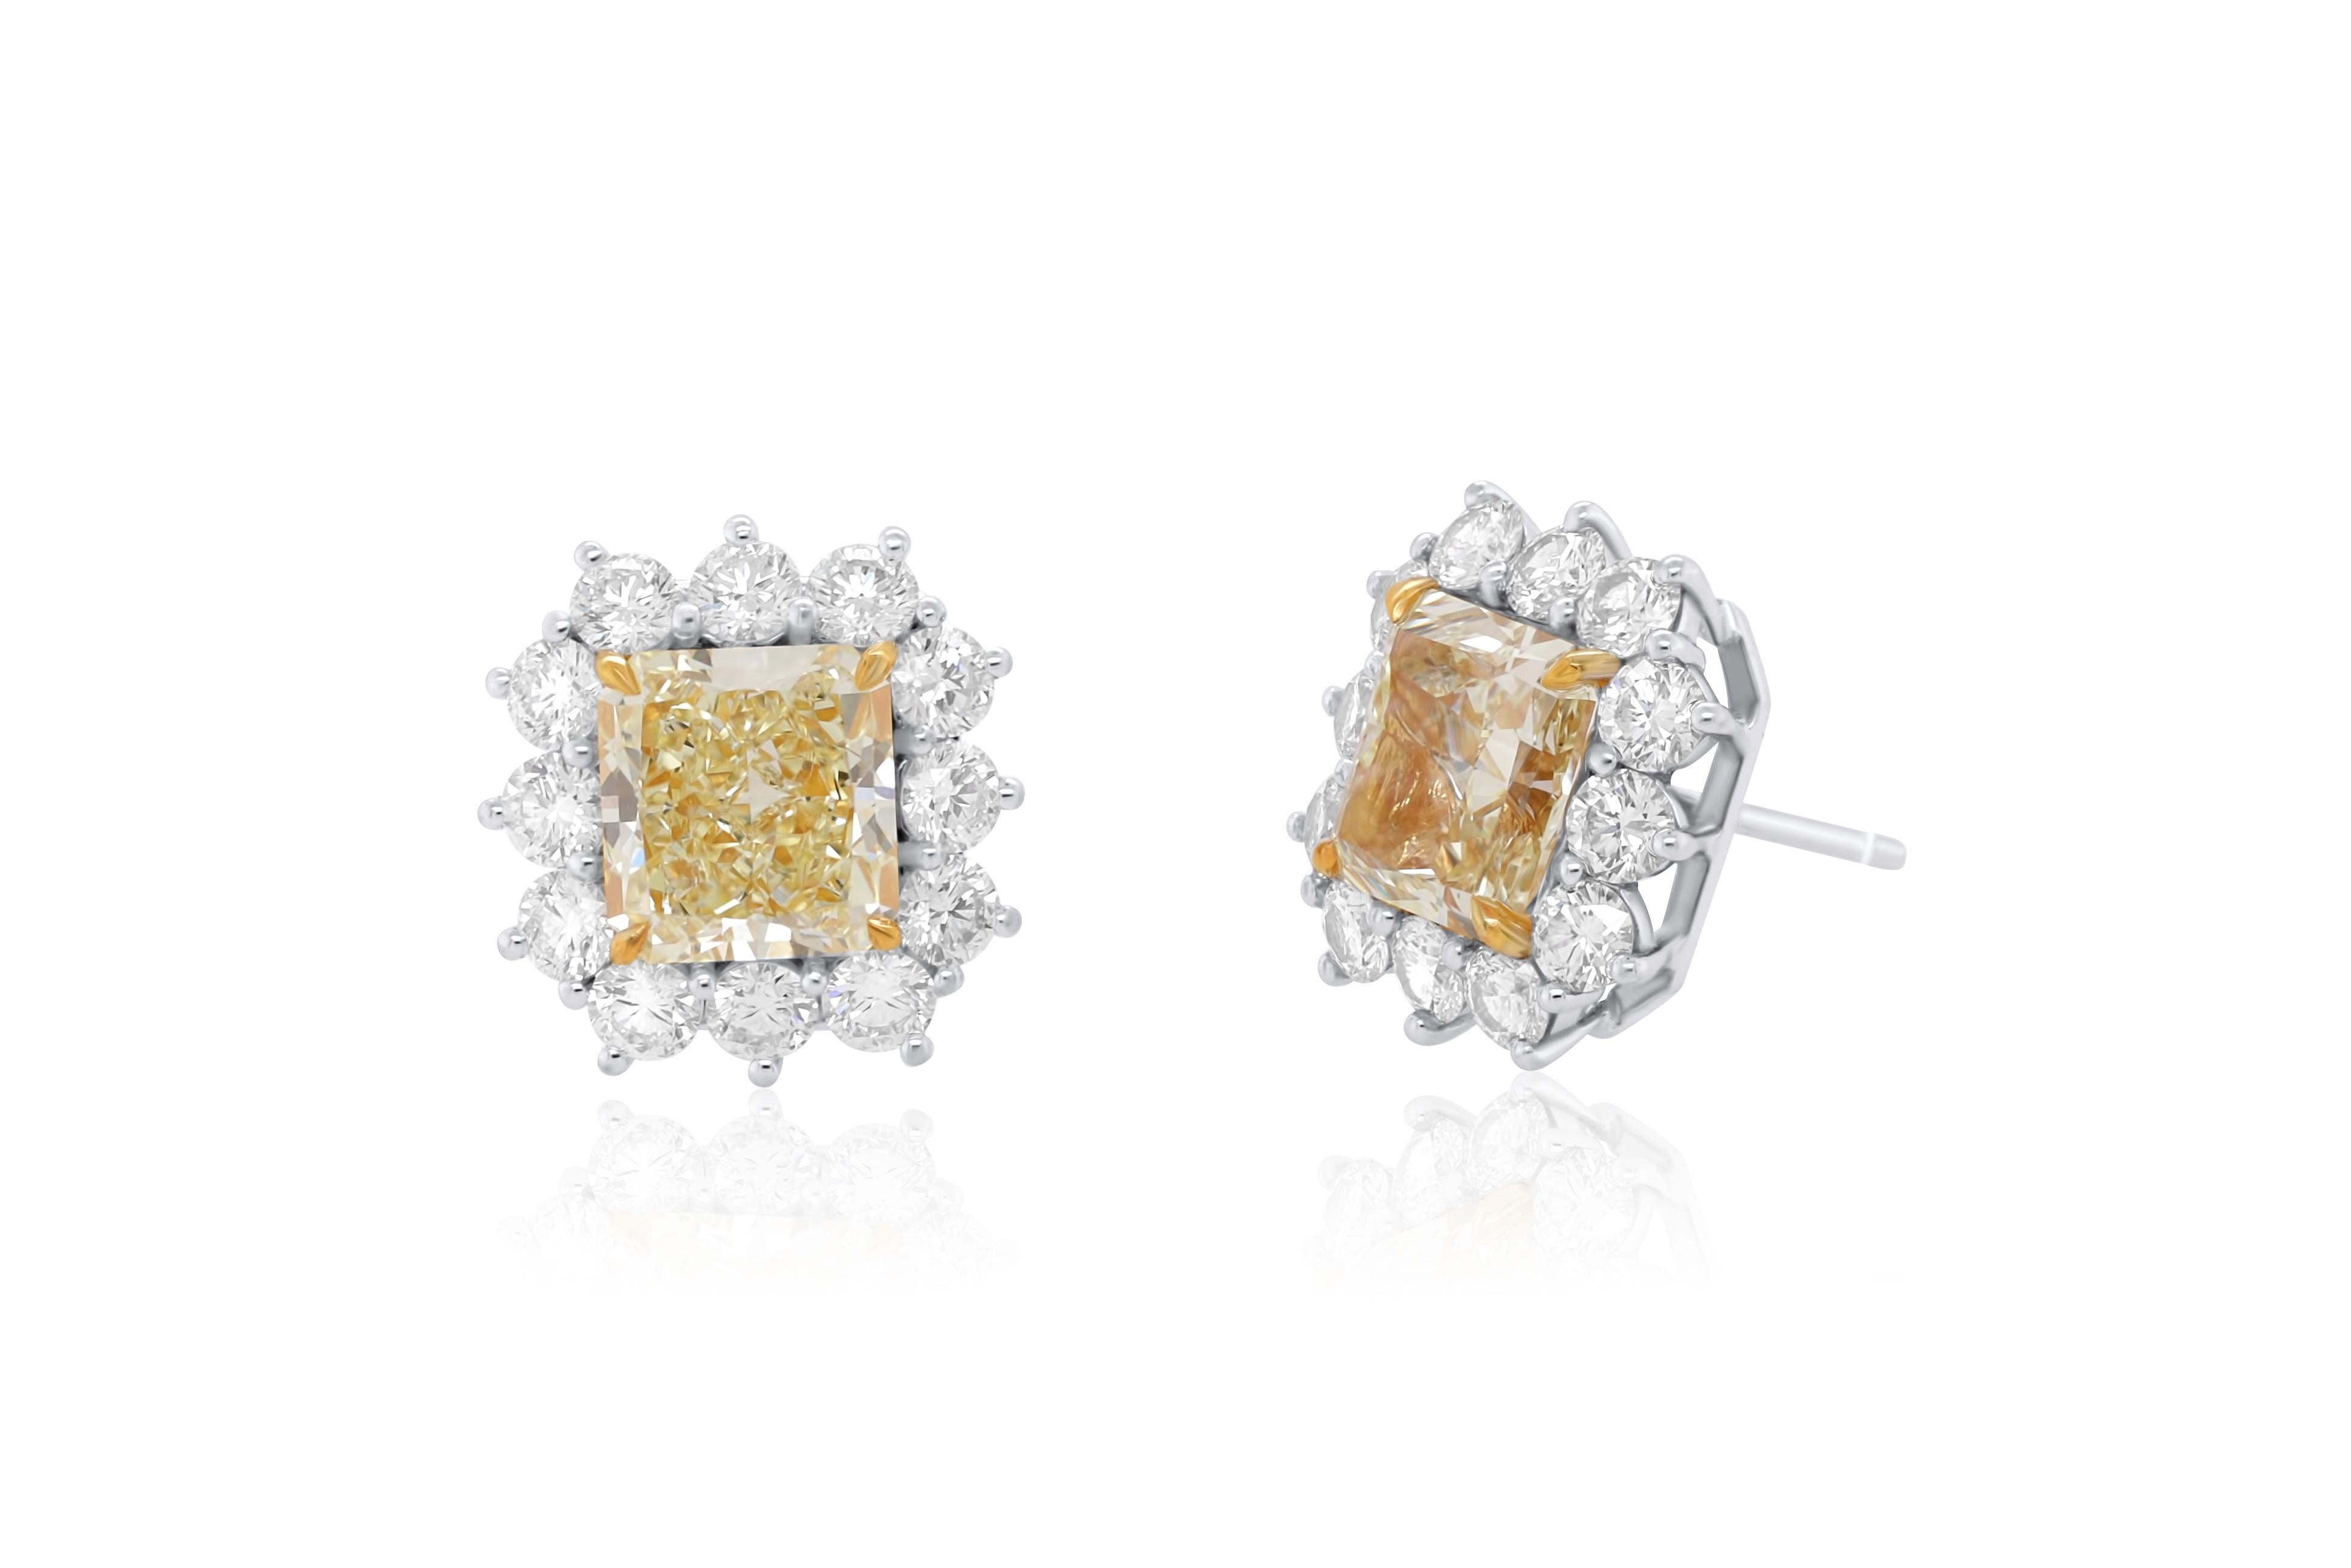 18KT WHITE AND YELLOW GOLD DIAMOND STUDS, FEATURES 6.79ct OF TWO  GIA#5211187110 &1216111794 CERTIFIED RADIANT CUT DIAMONDS FANCY YELLOW VVS1-IN A DIAMOND HALO 3.00CTS OF DIAMONDS ON SIDES.
Diana M. is a leading supplier of top-quality fine jewelry